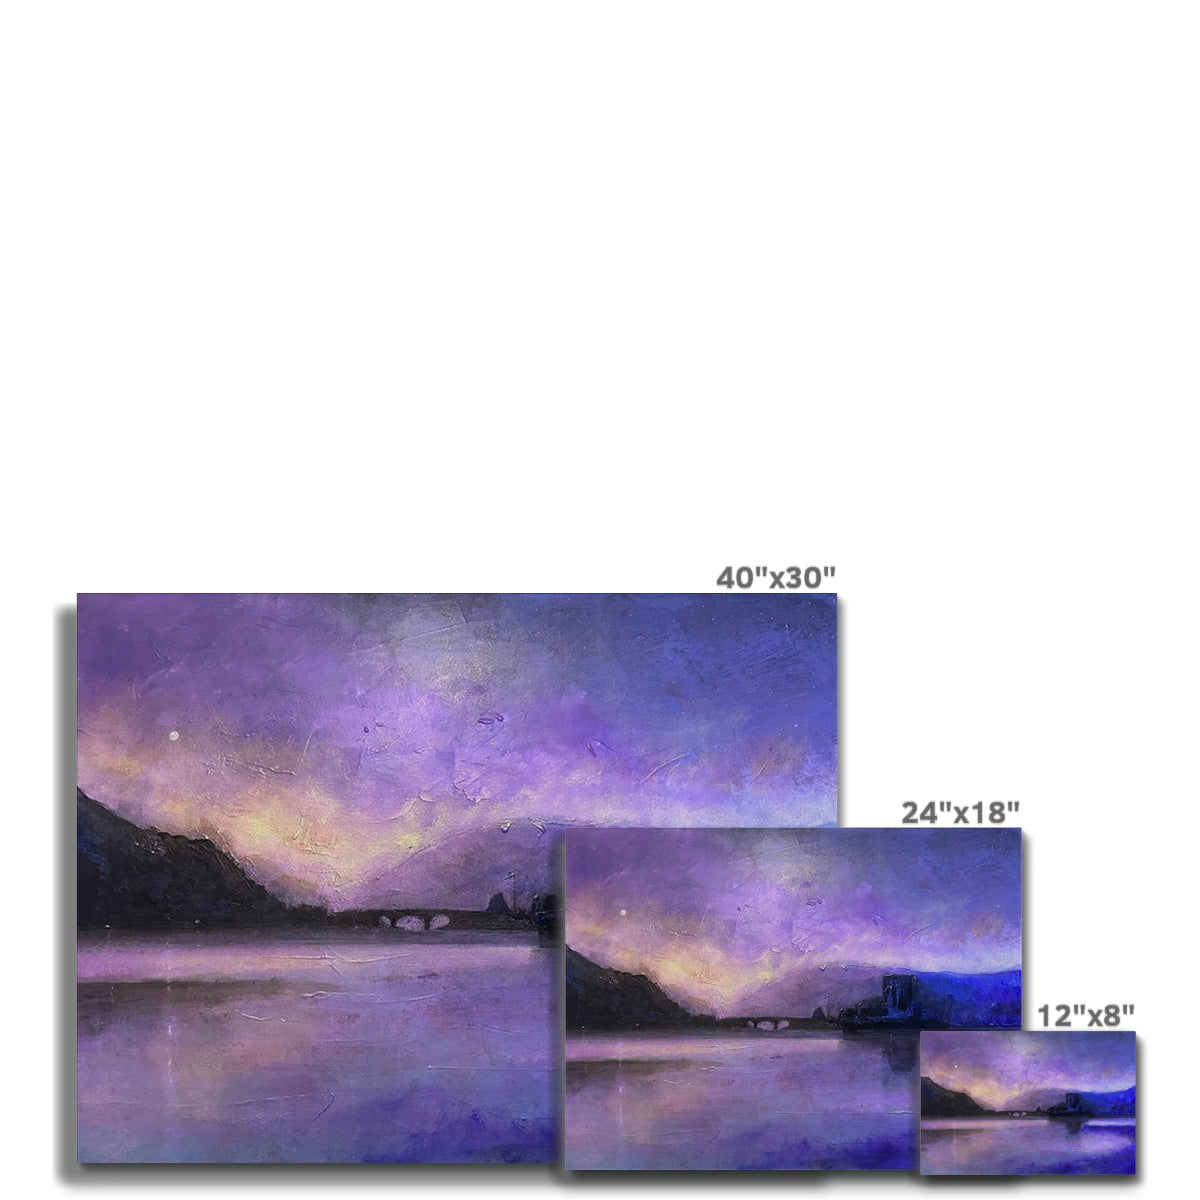 Eilean Donan Castle Moonset Painting | Canvas From Scotland-Contemporary Stretched Canvas Prints-Historic & Iconic Scotland Art Gallery-Paintings, Prints, Homeware, Art Gifts From Scotland By Scottish Artist Kevin Hunter